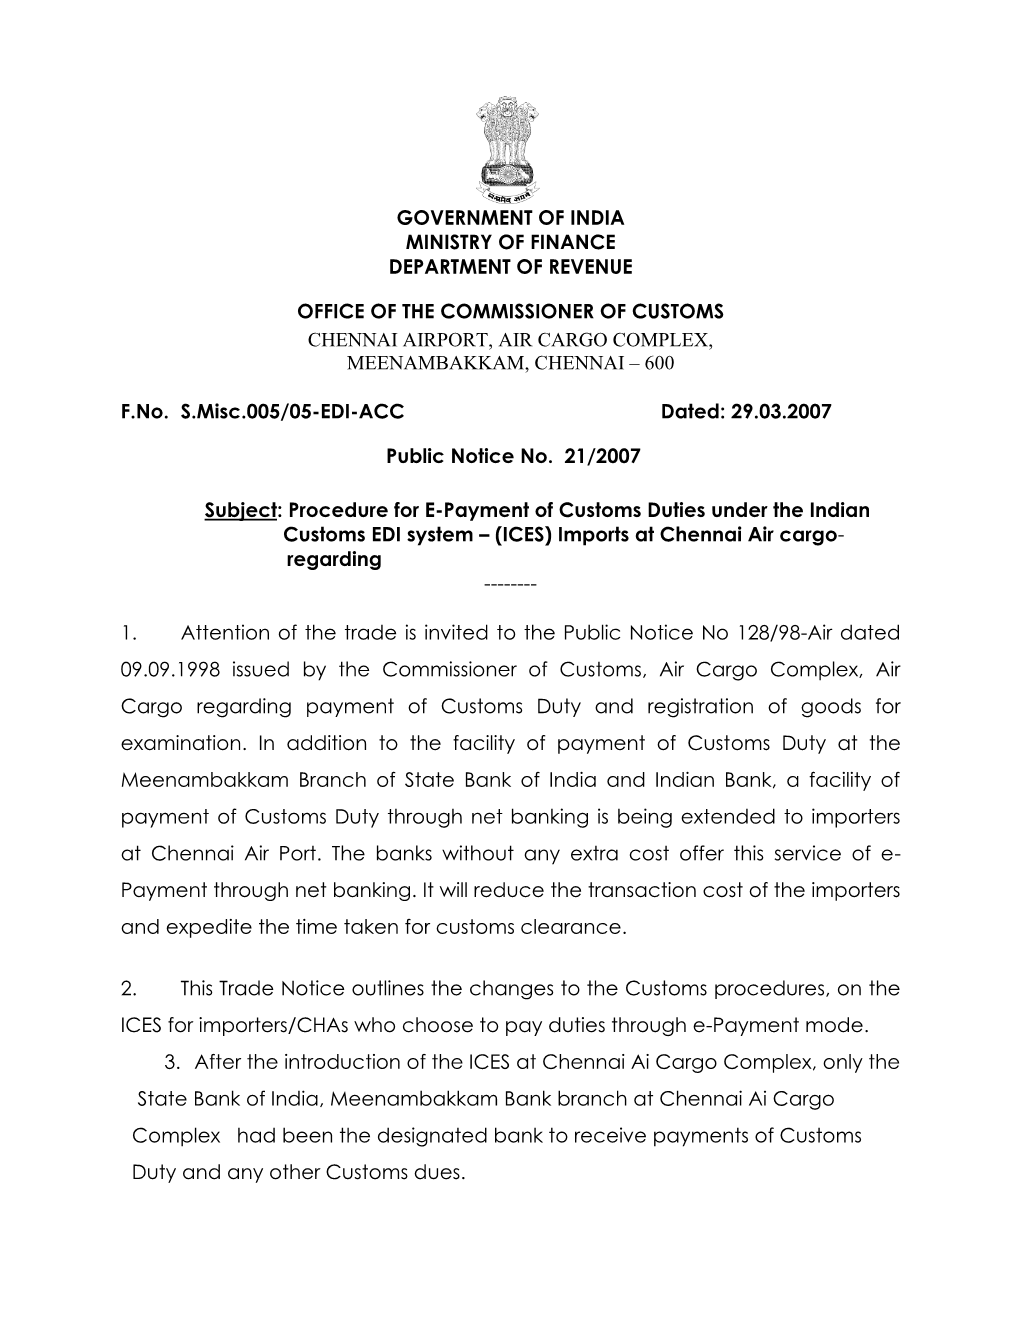 Government of India Ministry of Finance Department of Revenue Office of the Commissioner of Customs Chennai Airport, Air Cargo C